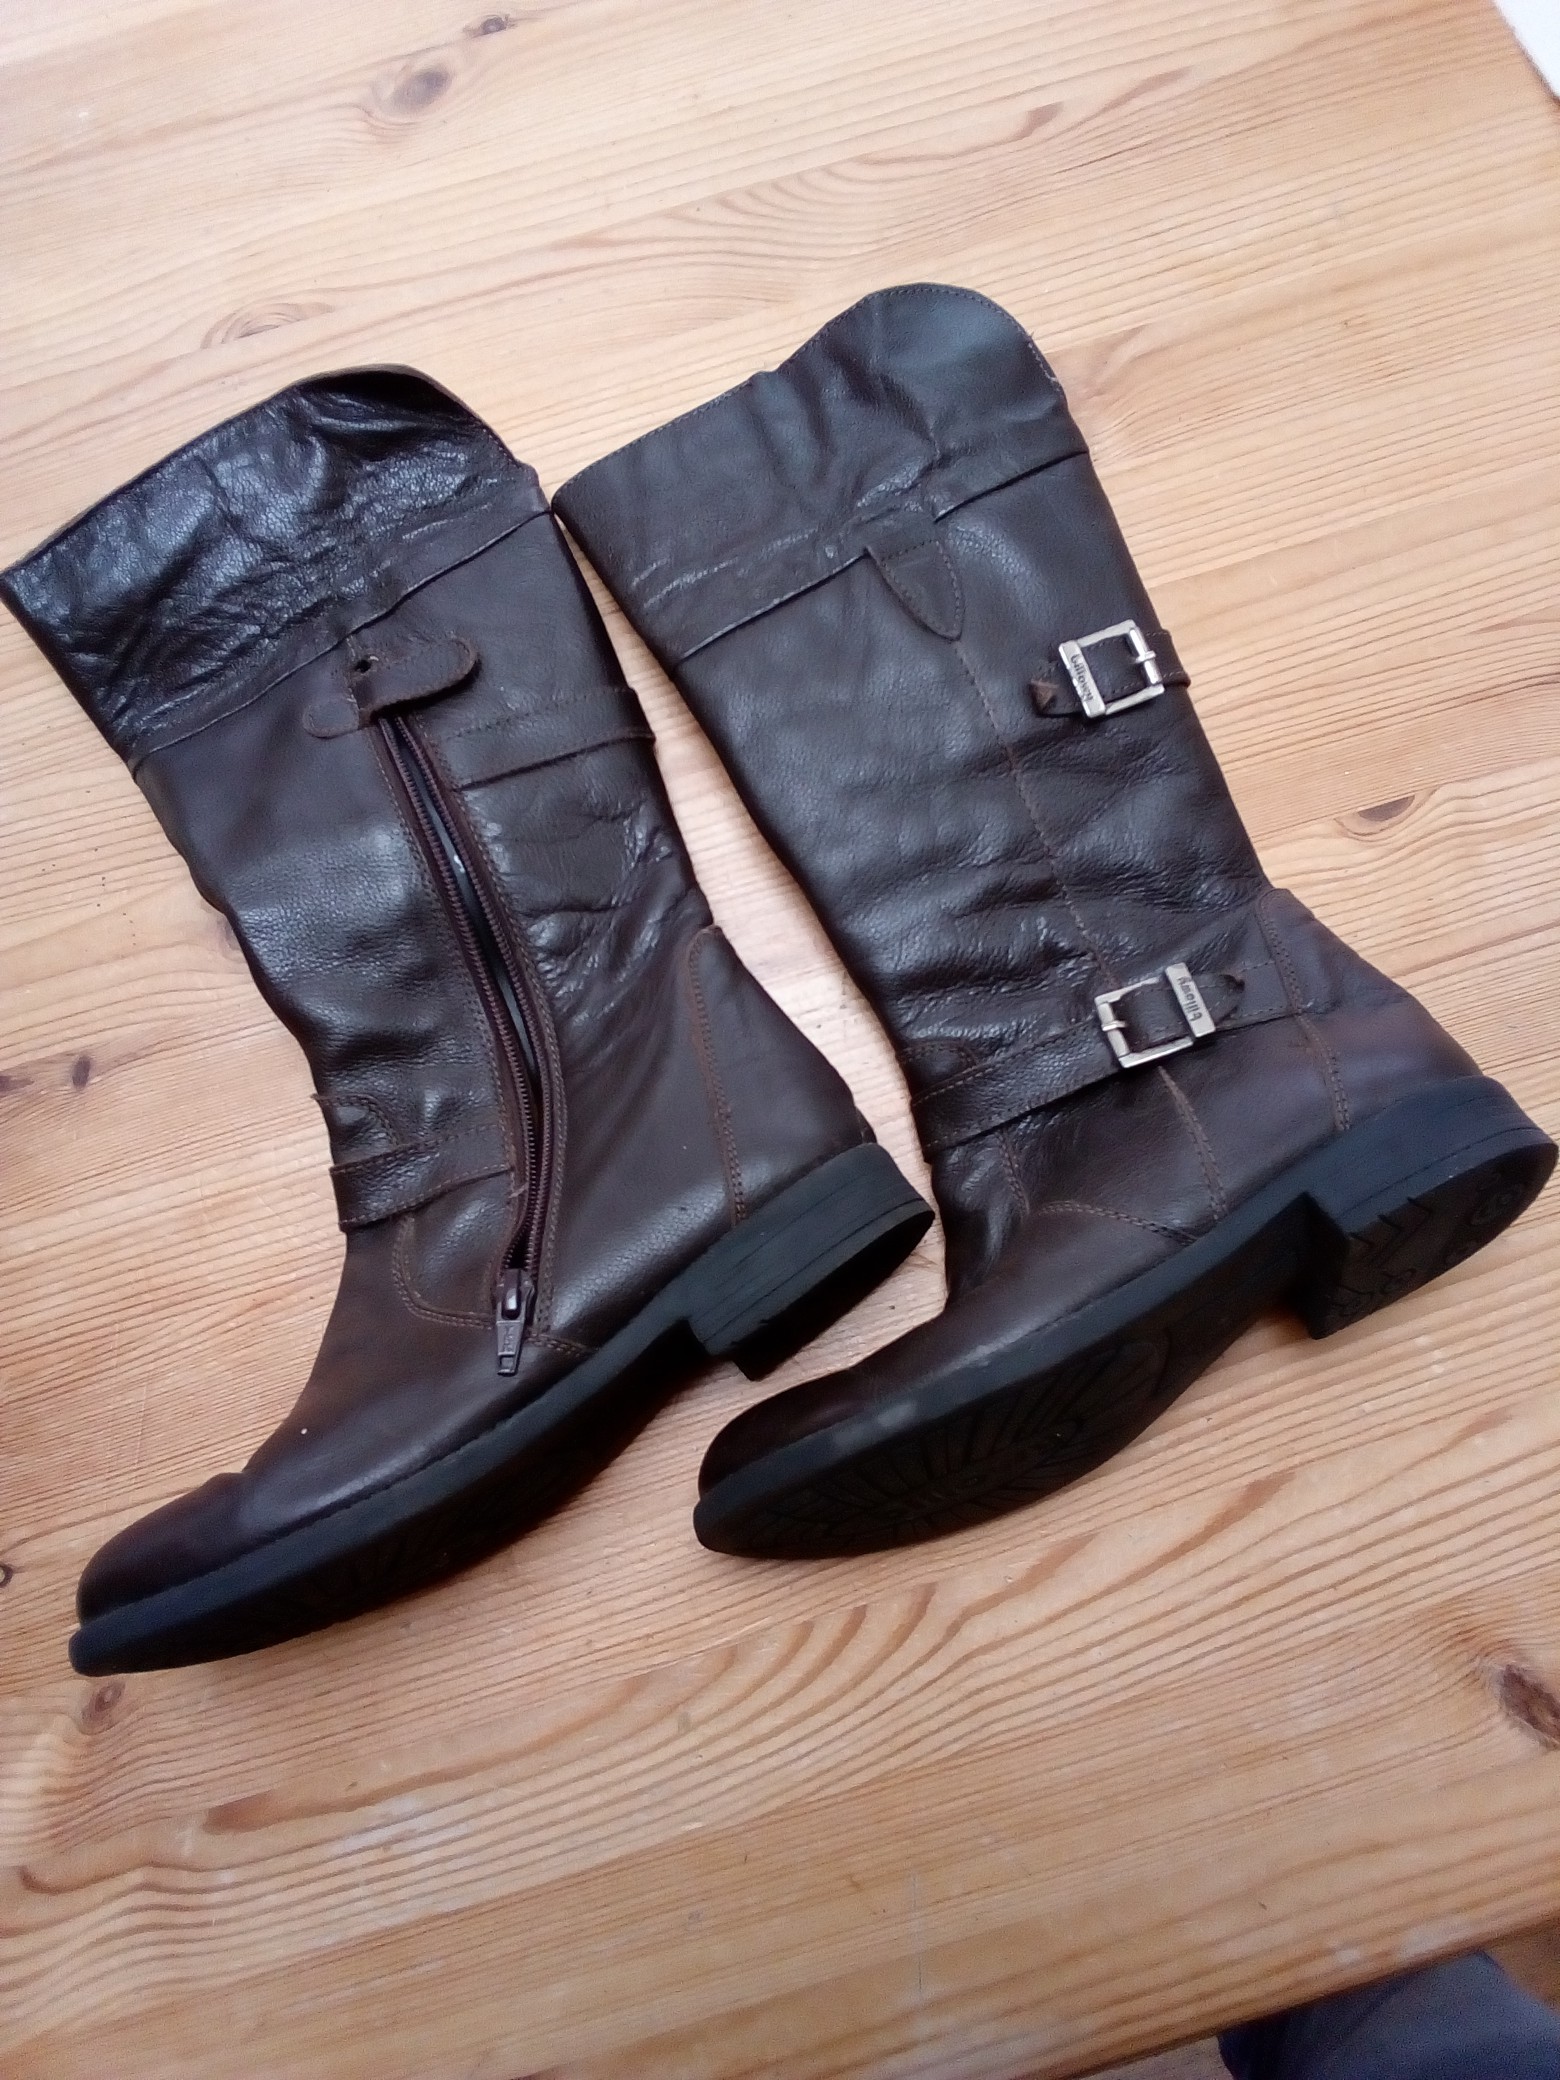 Girls leather boots UK size 2/EU 34 For 